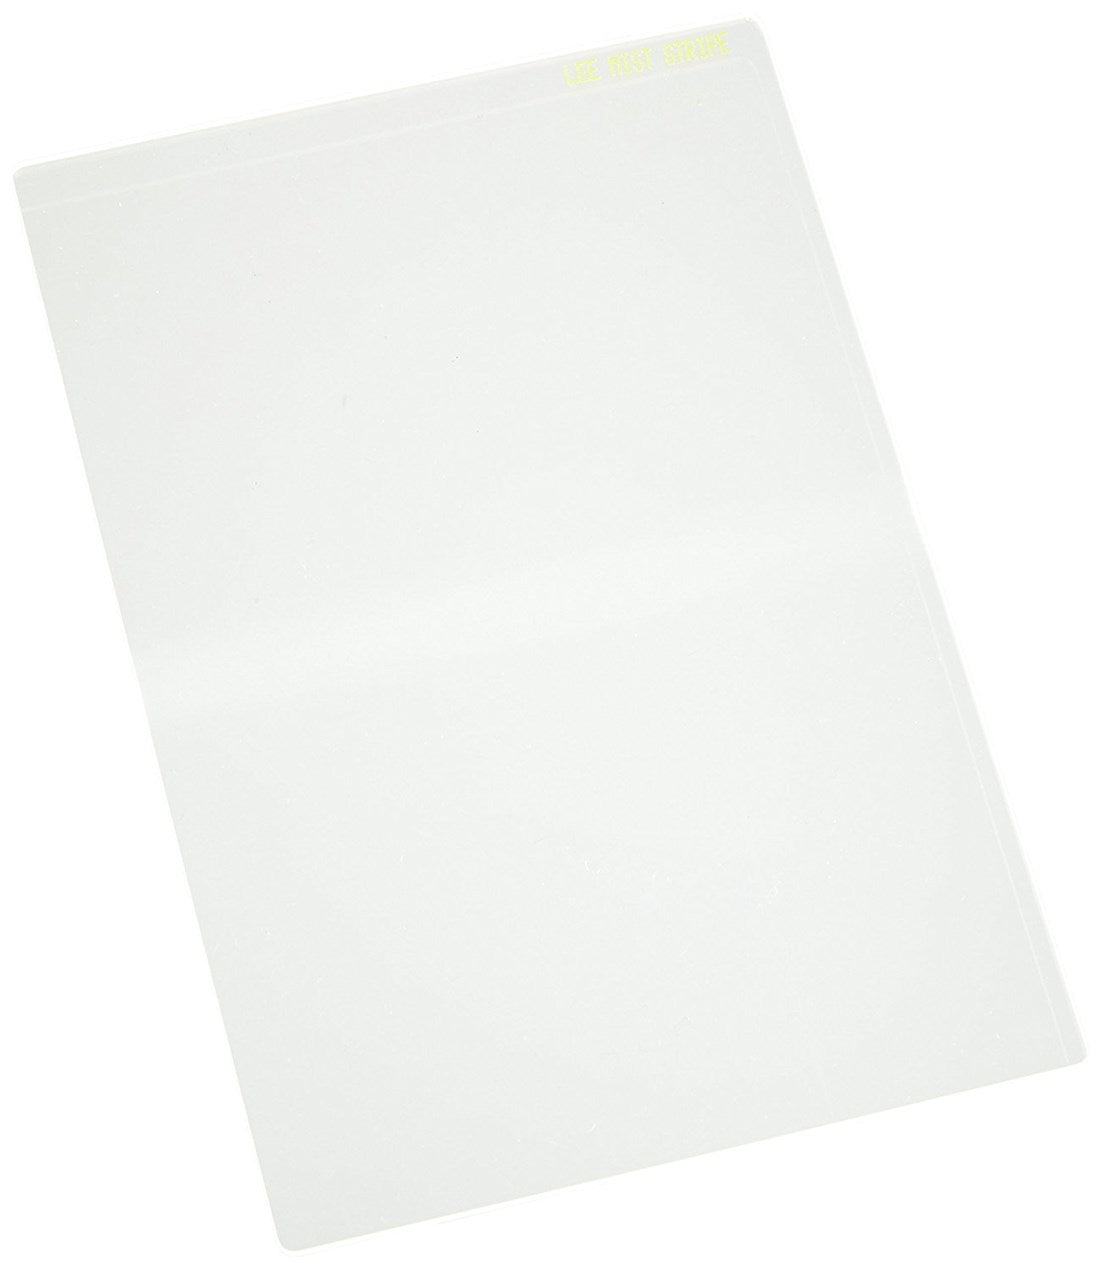 Product Image of LEE Filters Mist Stripe Filter for 100mm System